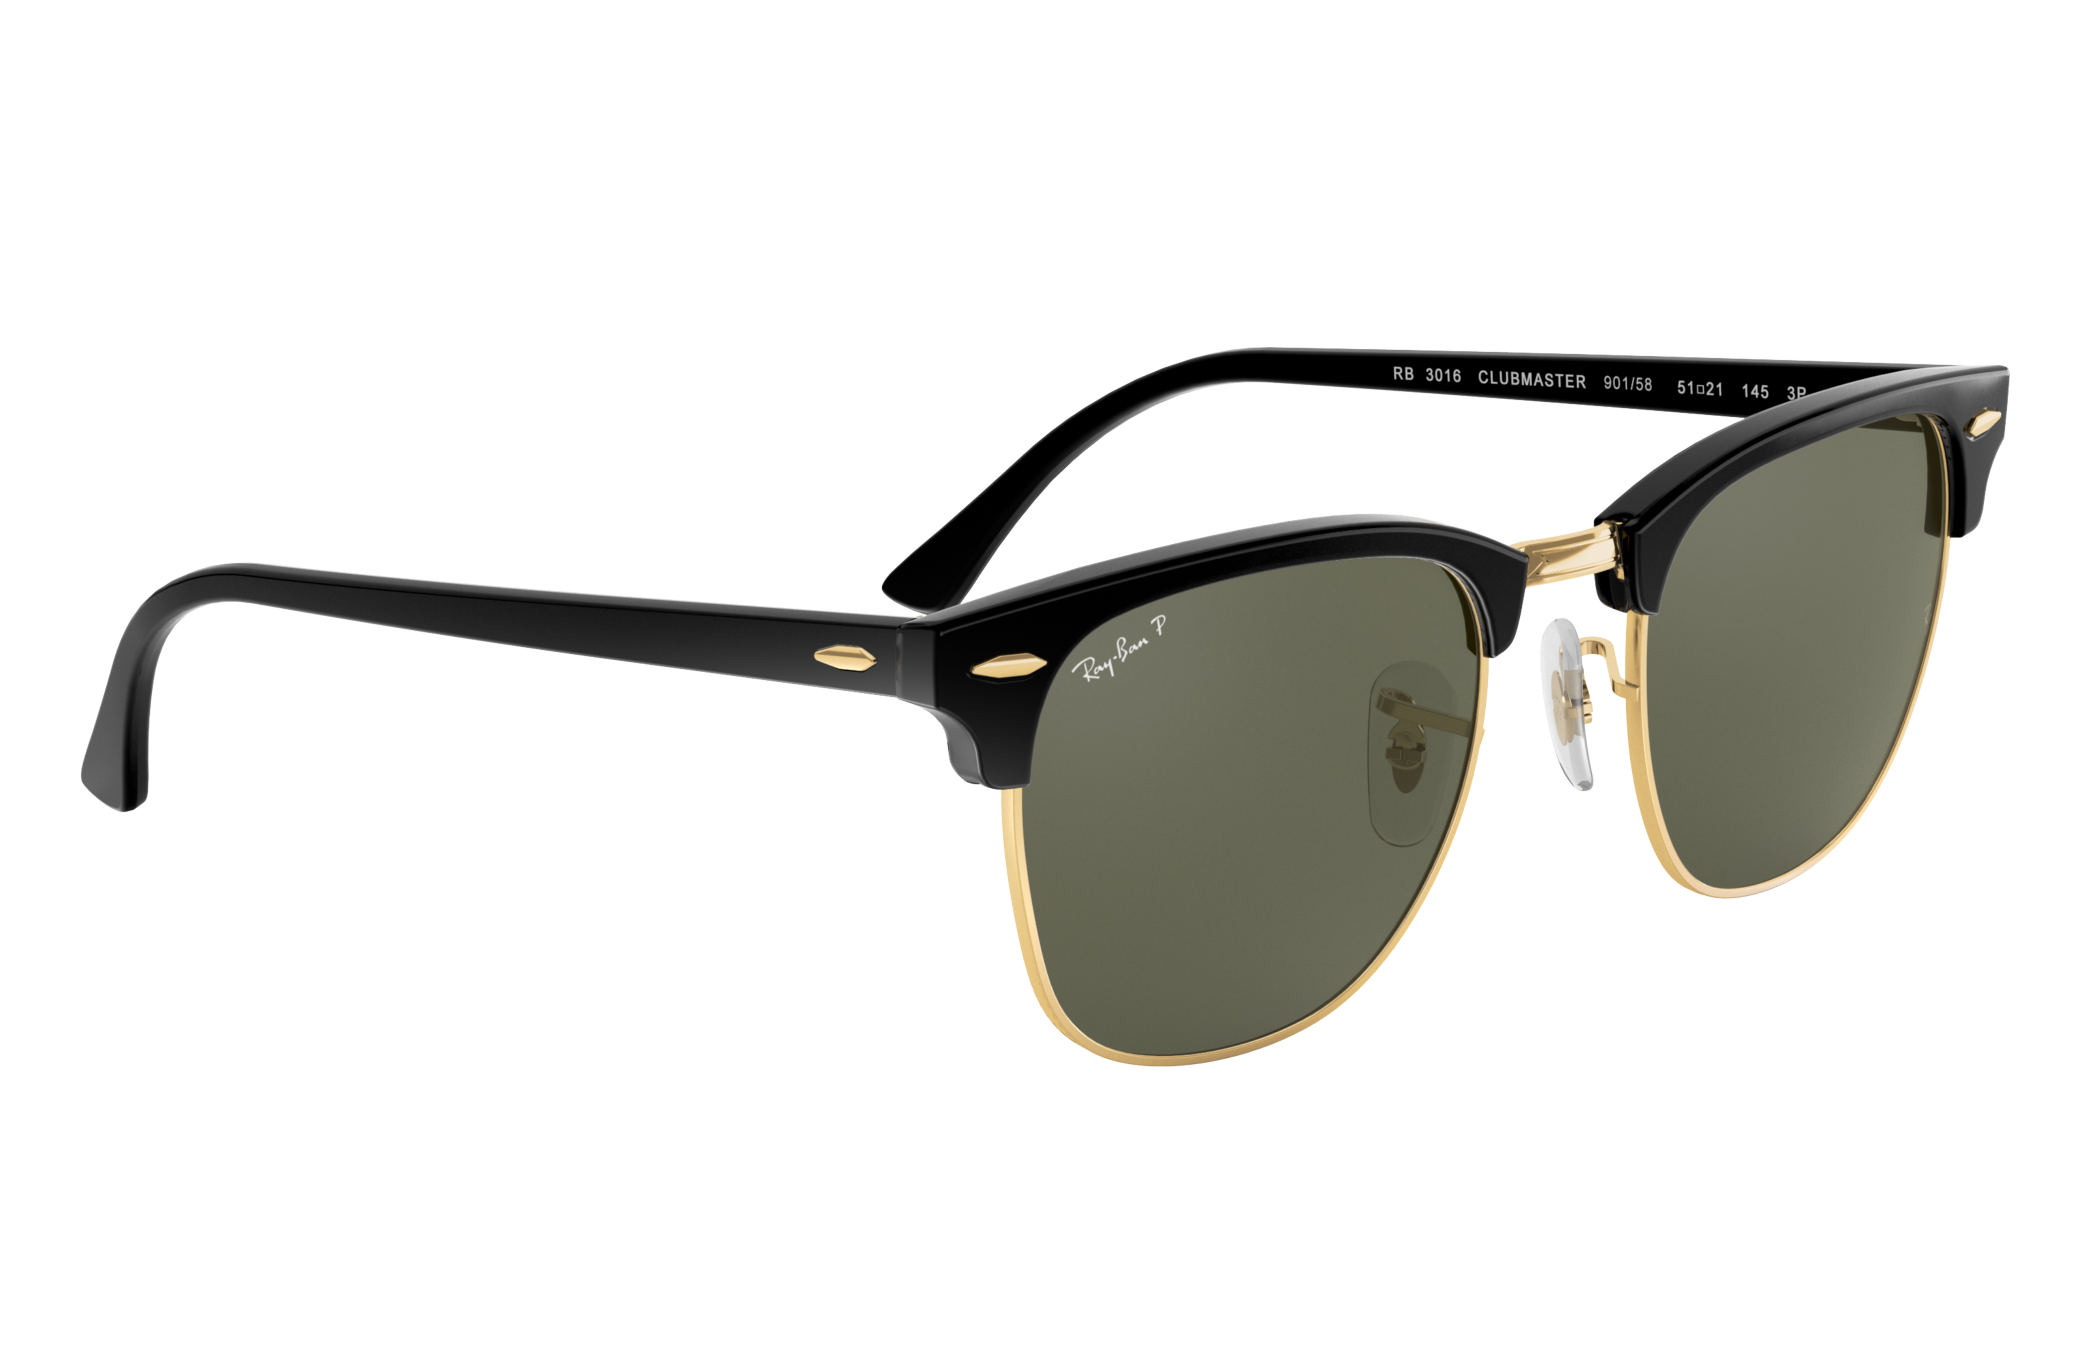 ray ban 51021 price in india